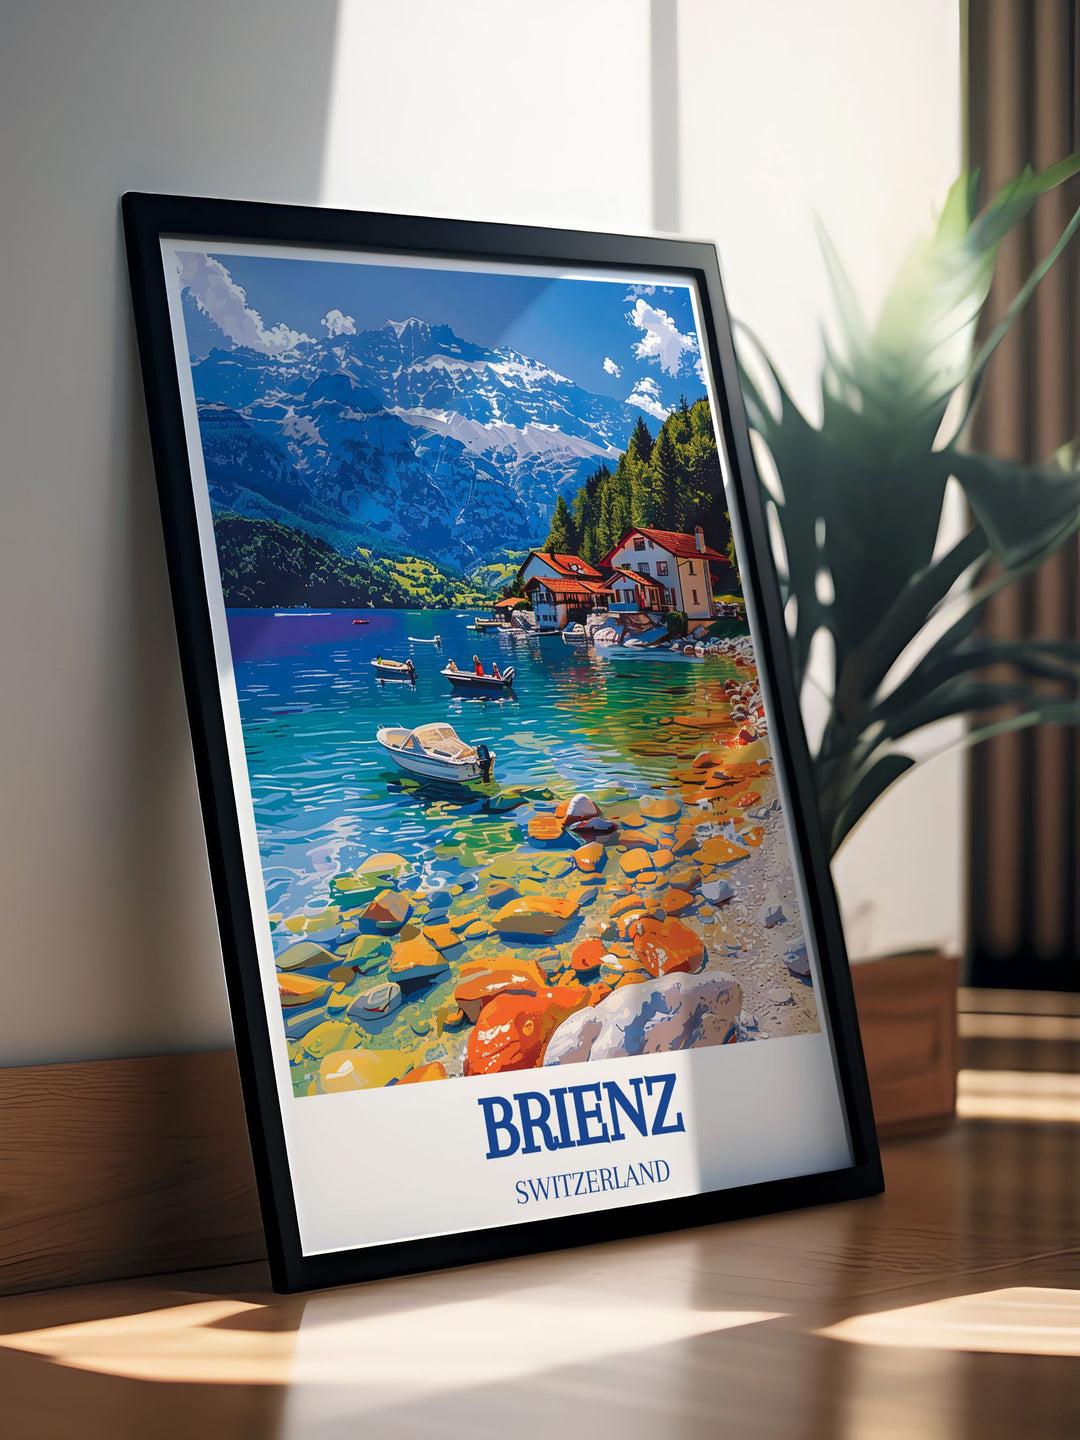 Framed print of Lake Brienz and Brienzer Rothorn designed to highlight the breathtaking views of the Swiss Alps ideal for enhancing your home decor with a touch of elegance and natural beauty